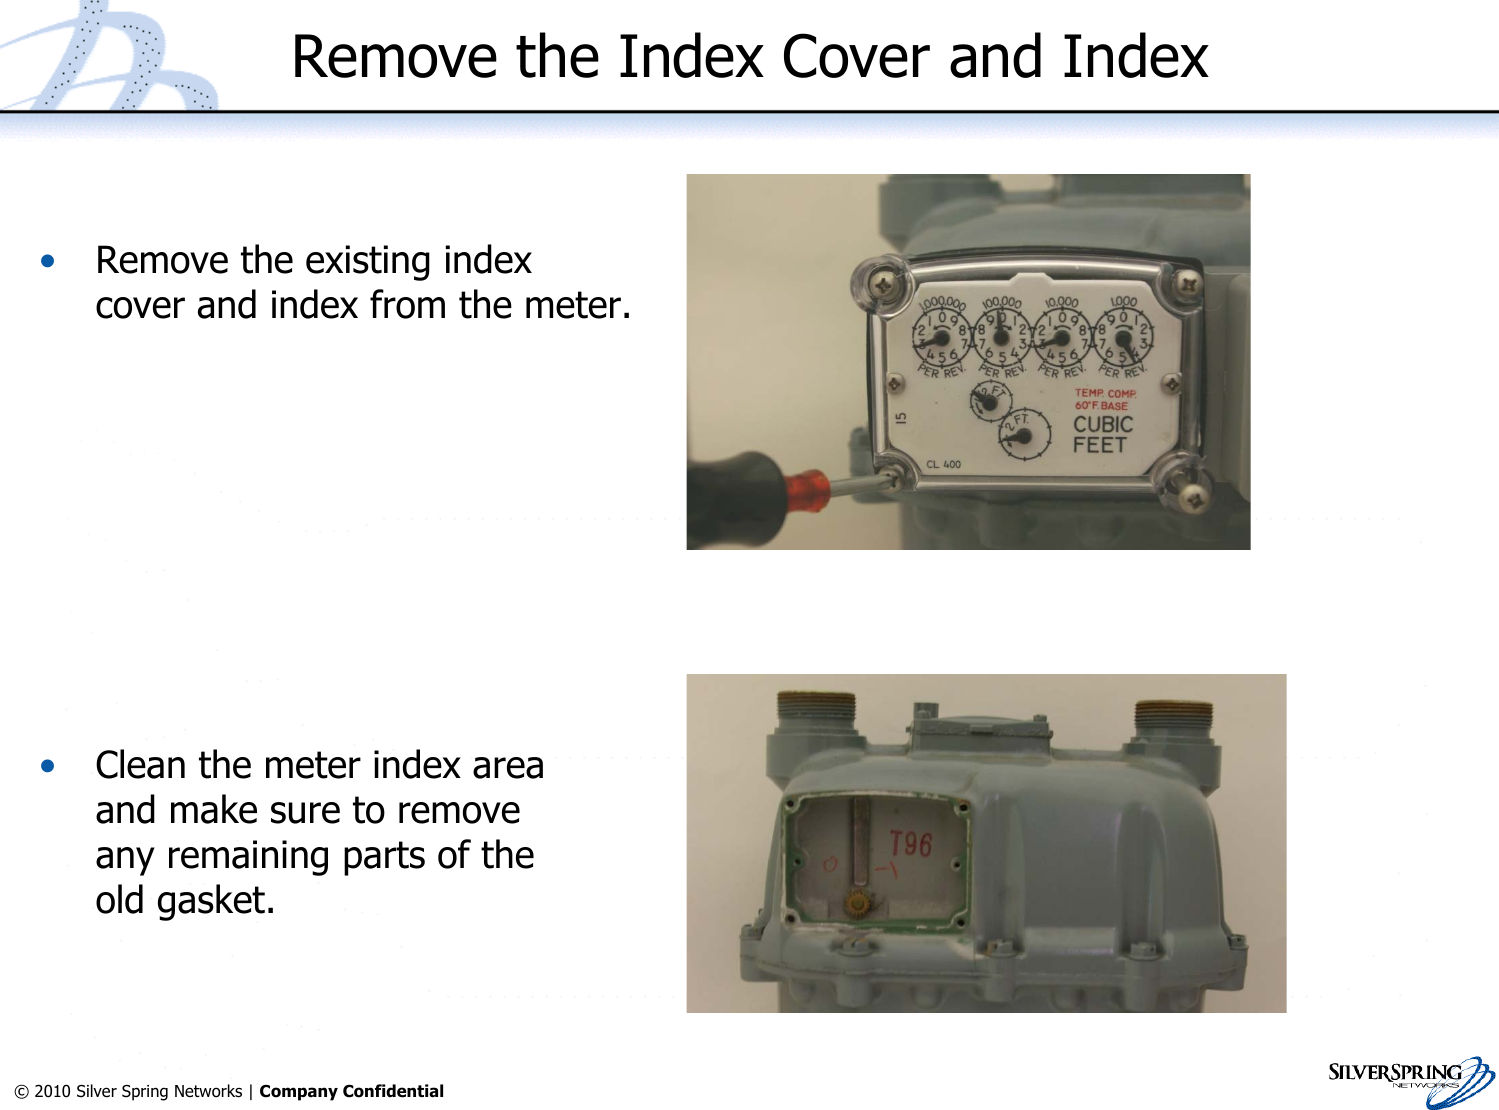 27© 2010 Silver Spring Networks | Company Confidential Remove the Index Cover and Index•Remove the existing indexcover and index from the meter.•Clean the meter index areaand make sure to removeany remaining parts of theold gasket.